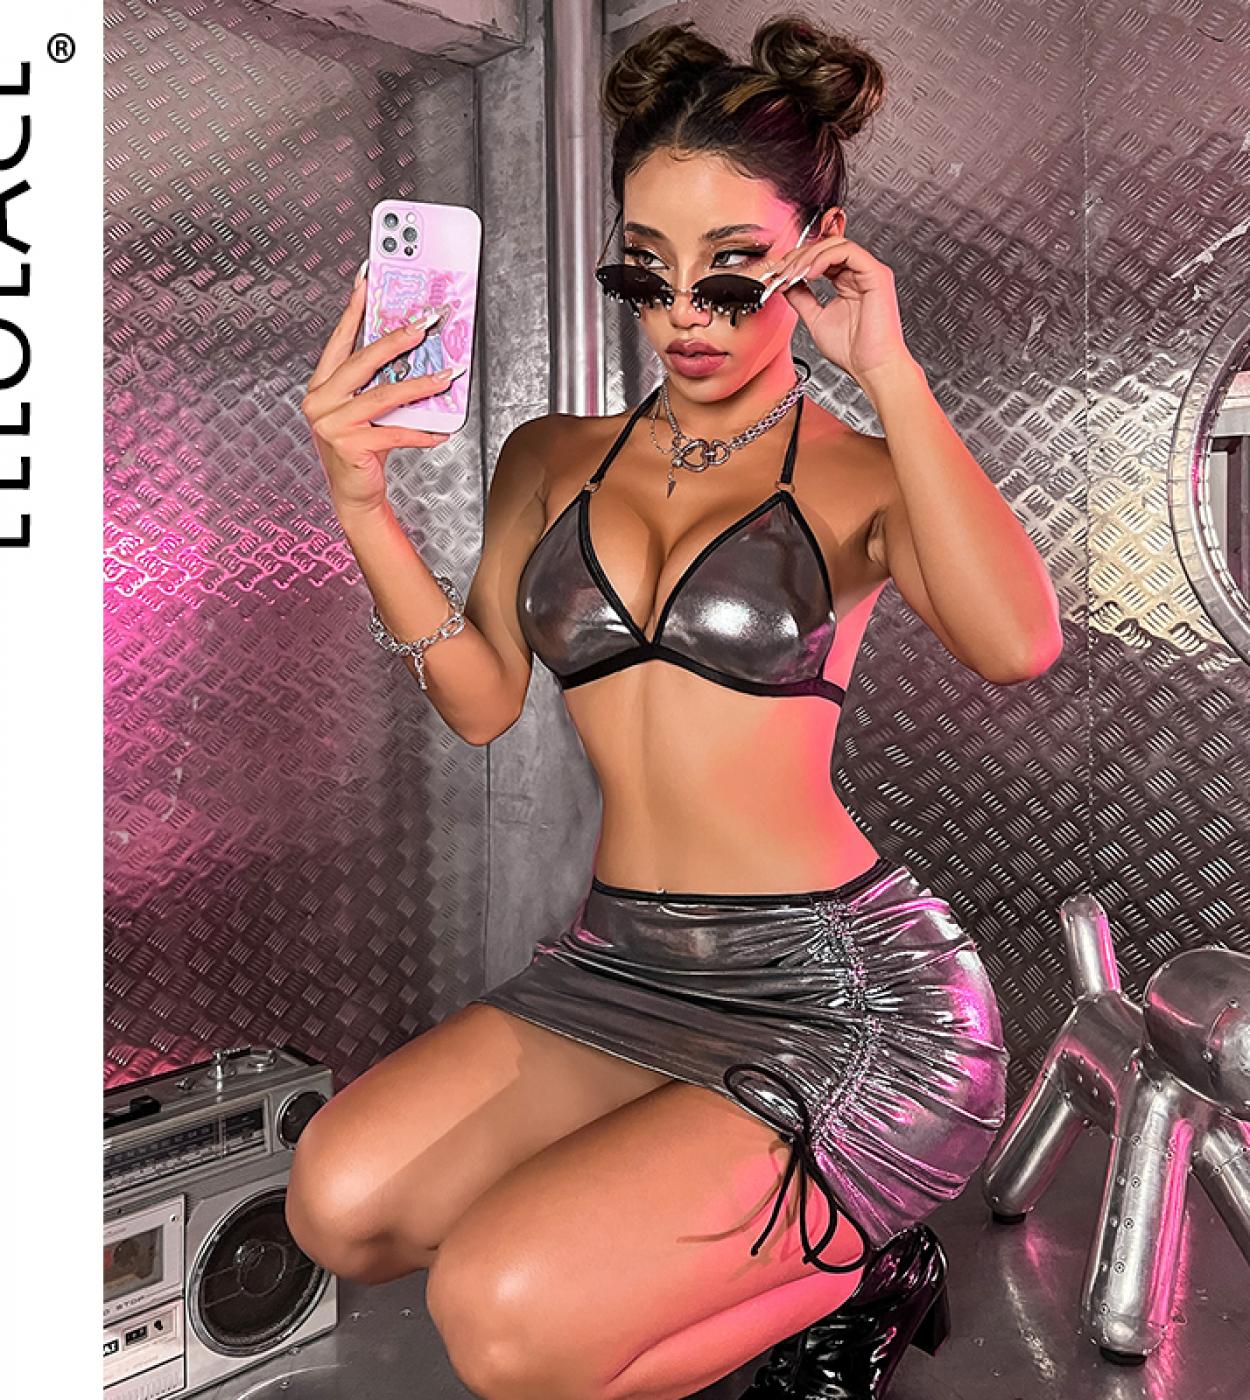 Ellolace Wetlook Lingerie For Women Sliver Fashion Trend Nightclub 3piece With Thongs Halter Bra Ruffle Skirt  Outfits  